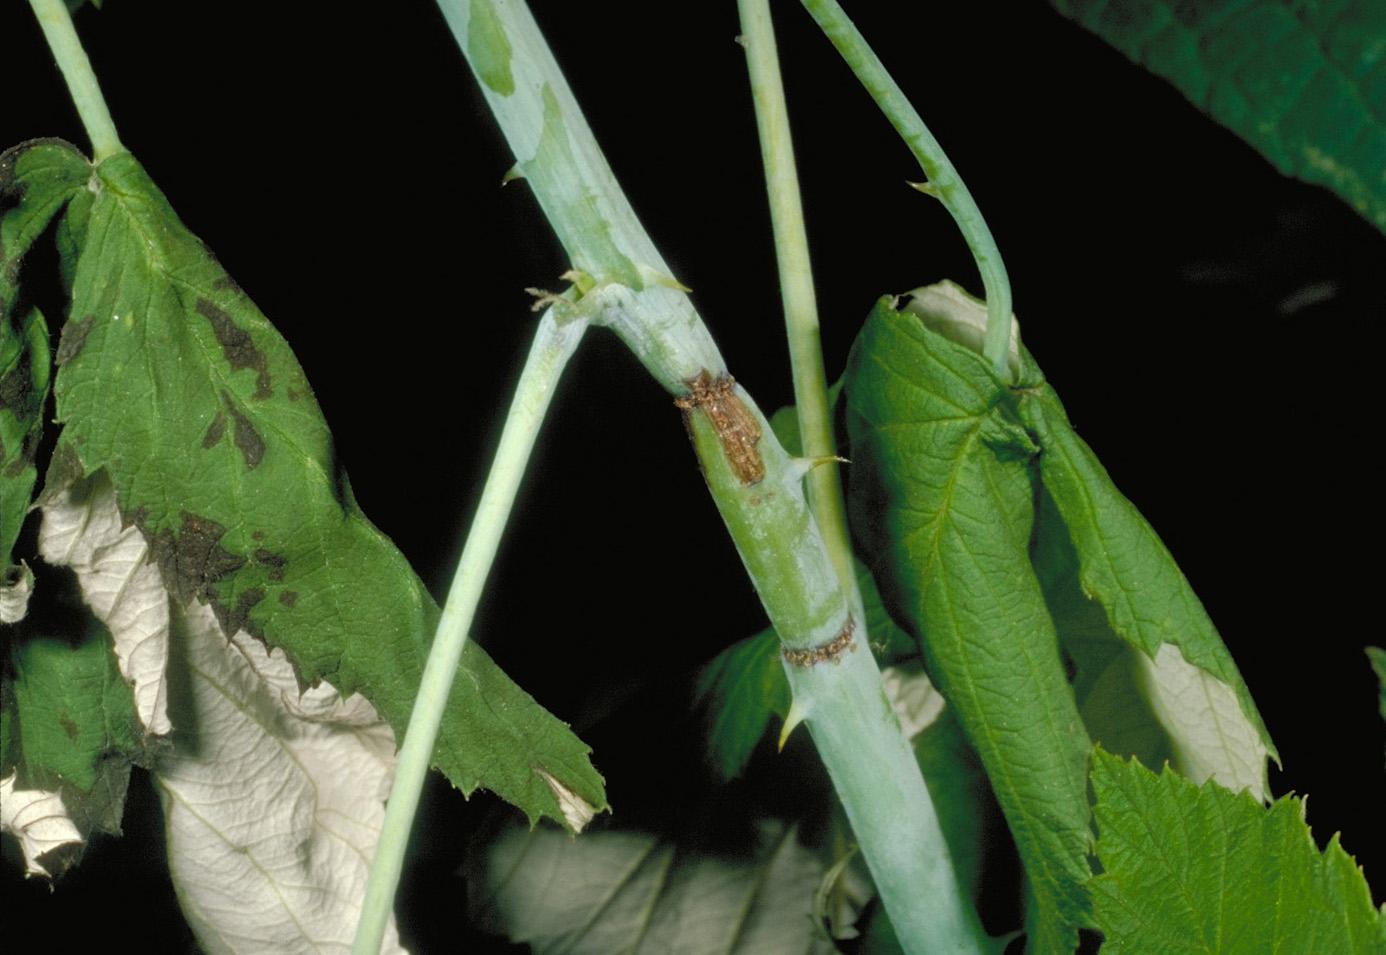 Raspberry cane borer oviposition ring damage results in wilting cane tips. 